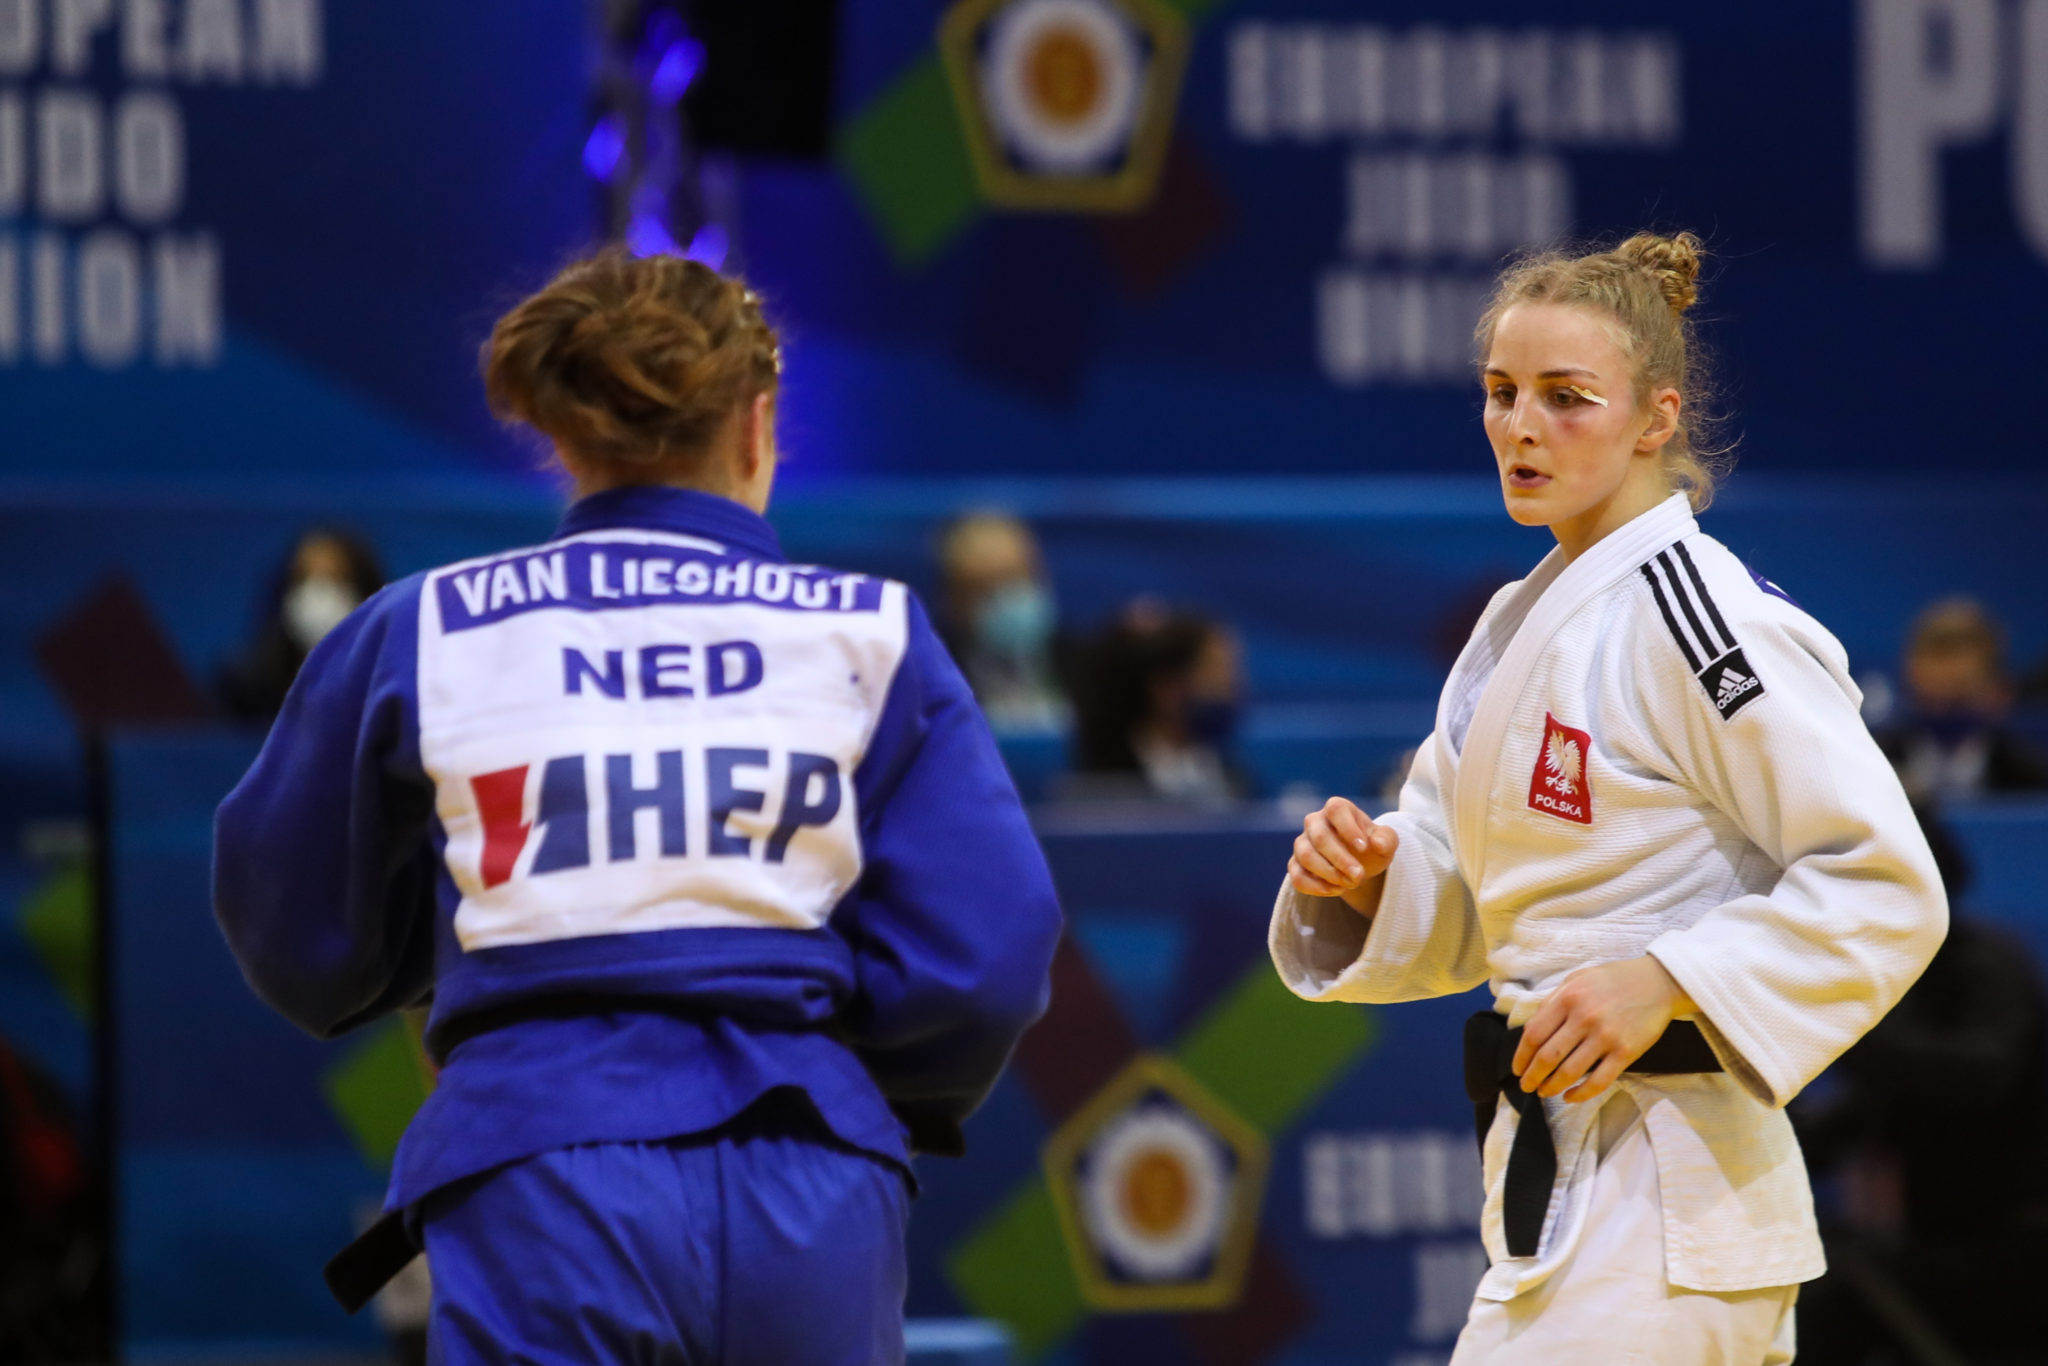 YOUNGEST ENTRY VAN LIESHOUT TAKES GOLD FOR NETHERLANDS